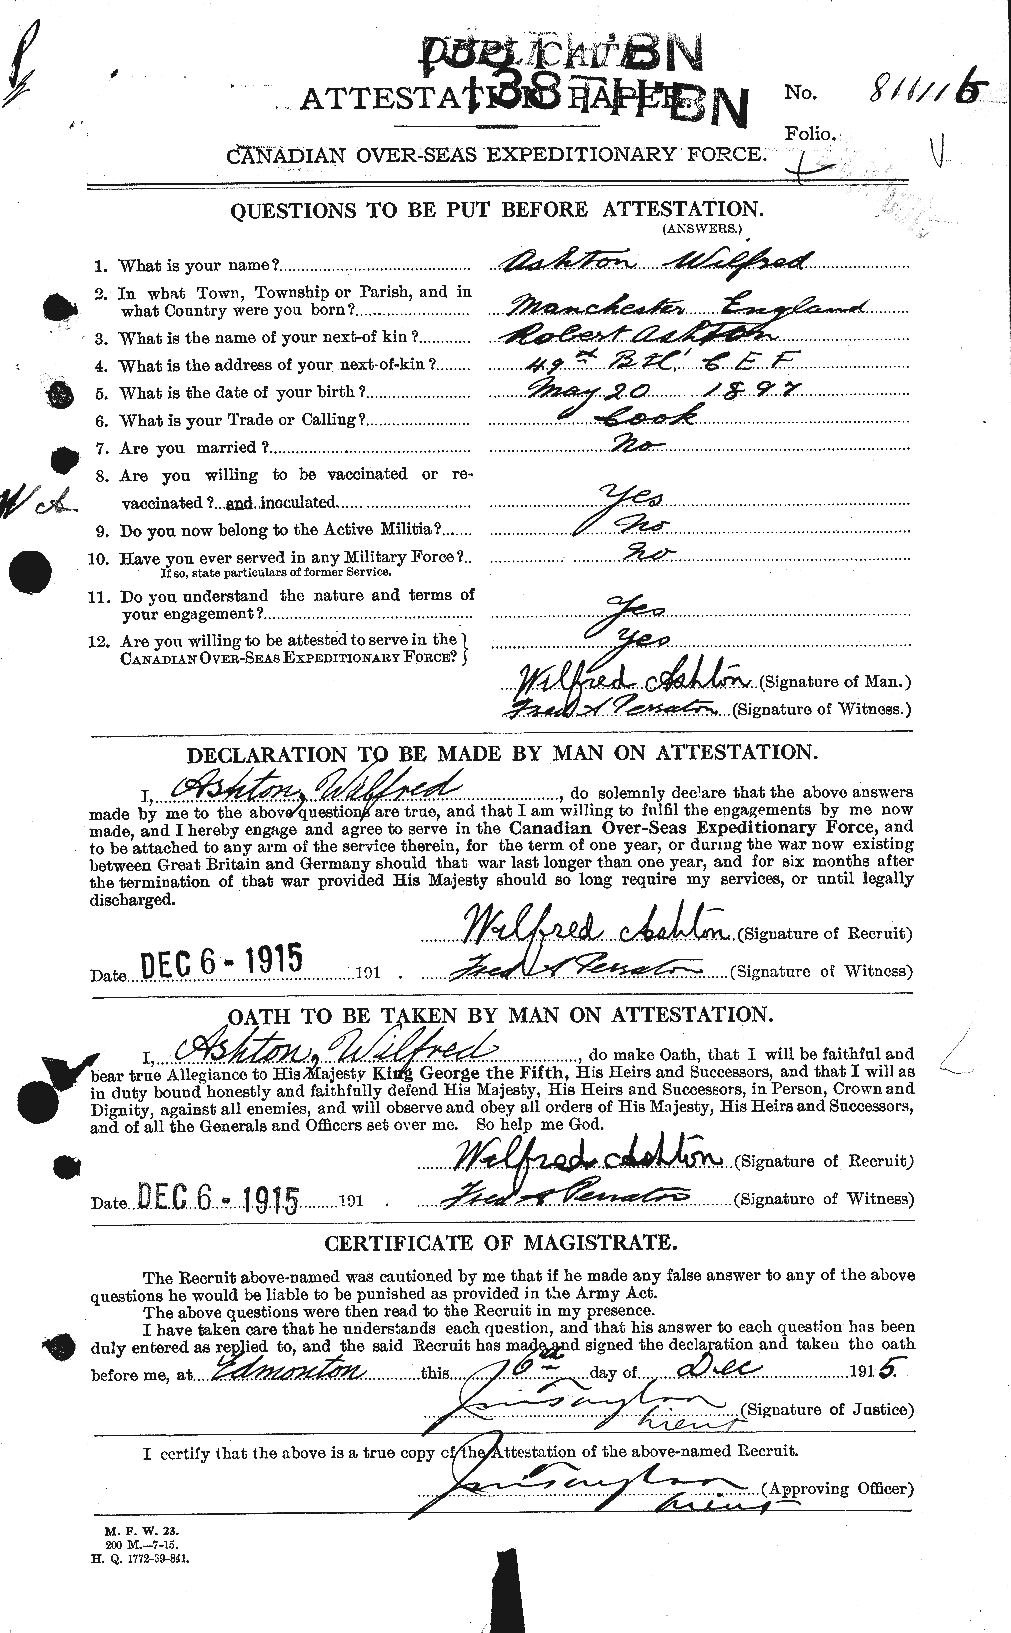 Personnel Records of the First World War - CEF 223792a